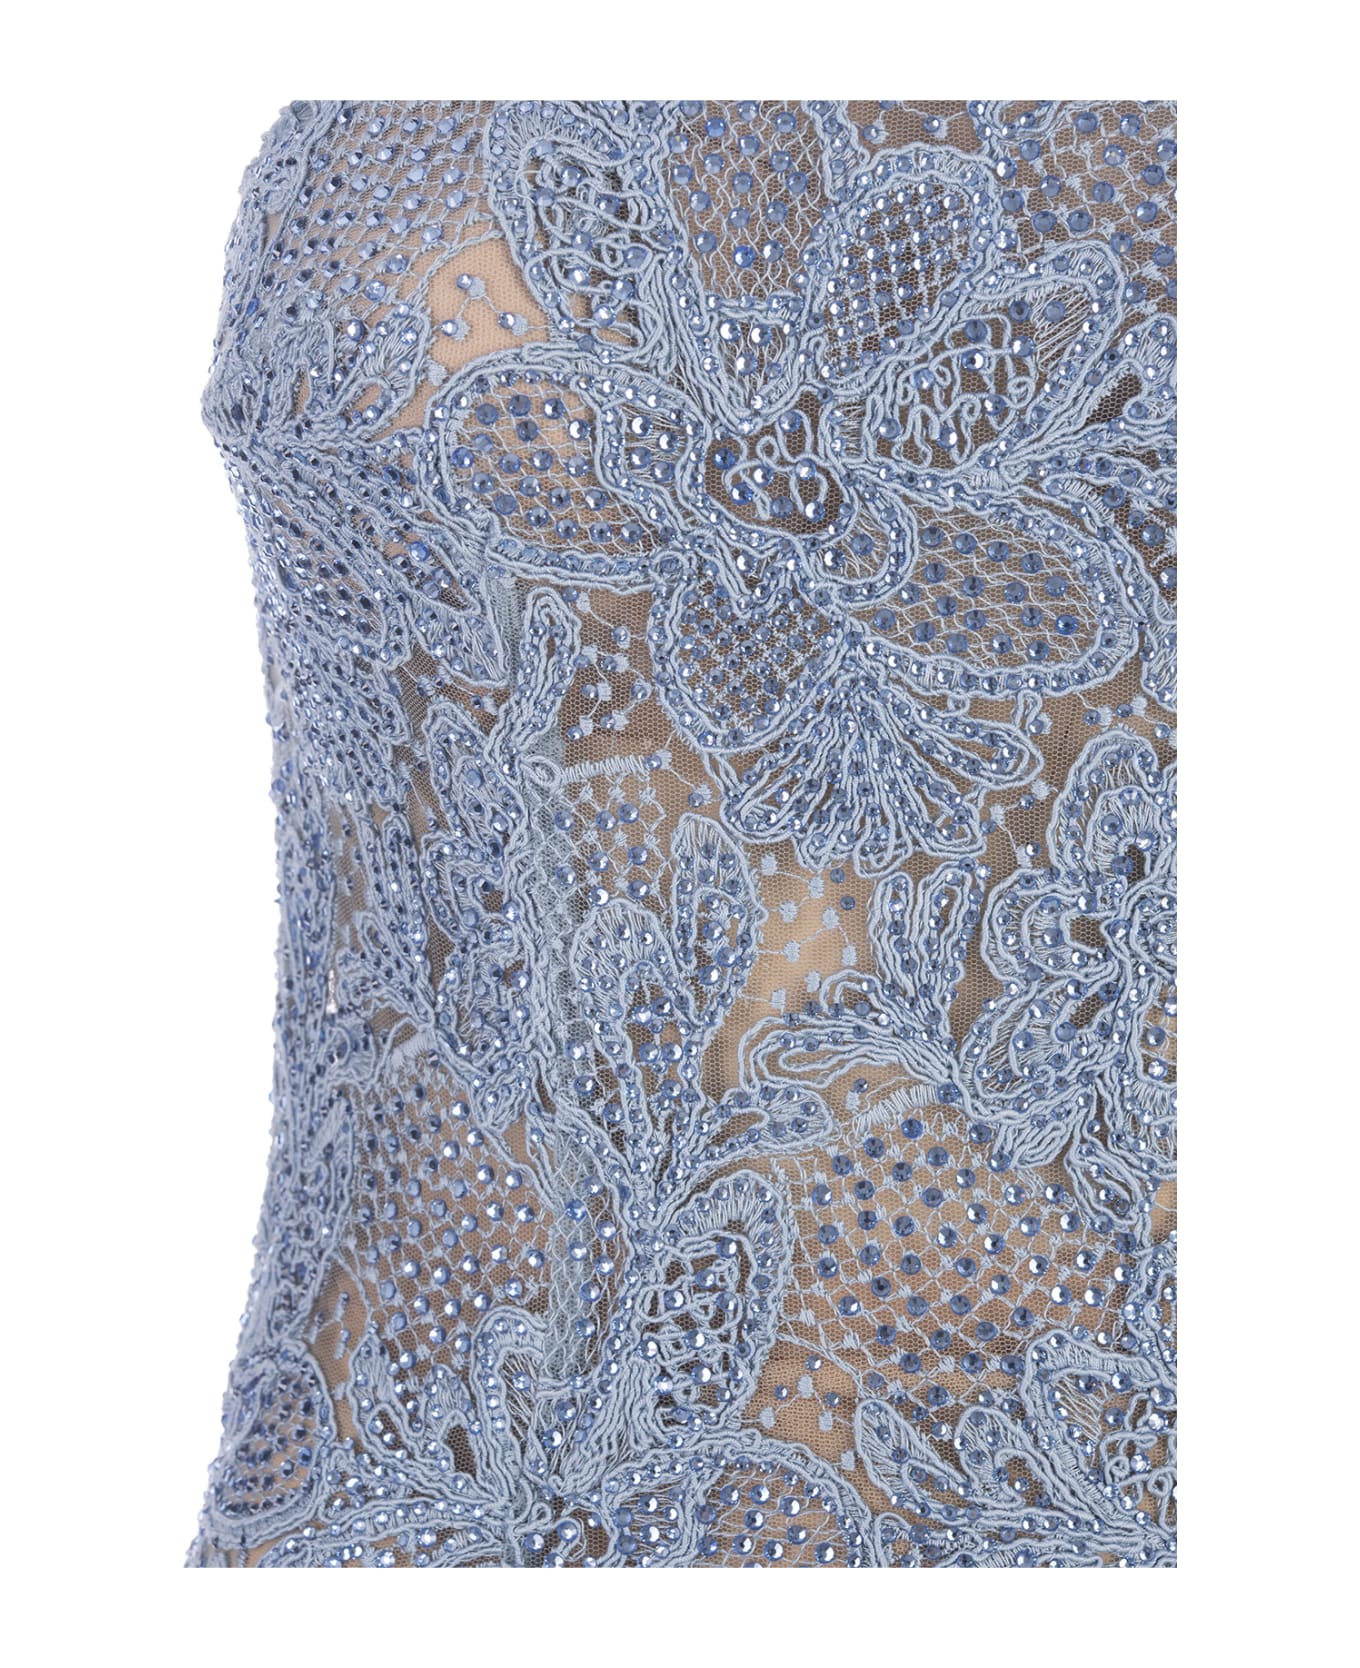 Ermanno Scervino Midi Dress In Light Blue Lace With Crystals - Blue